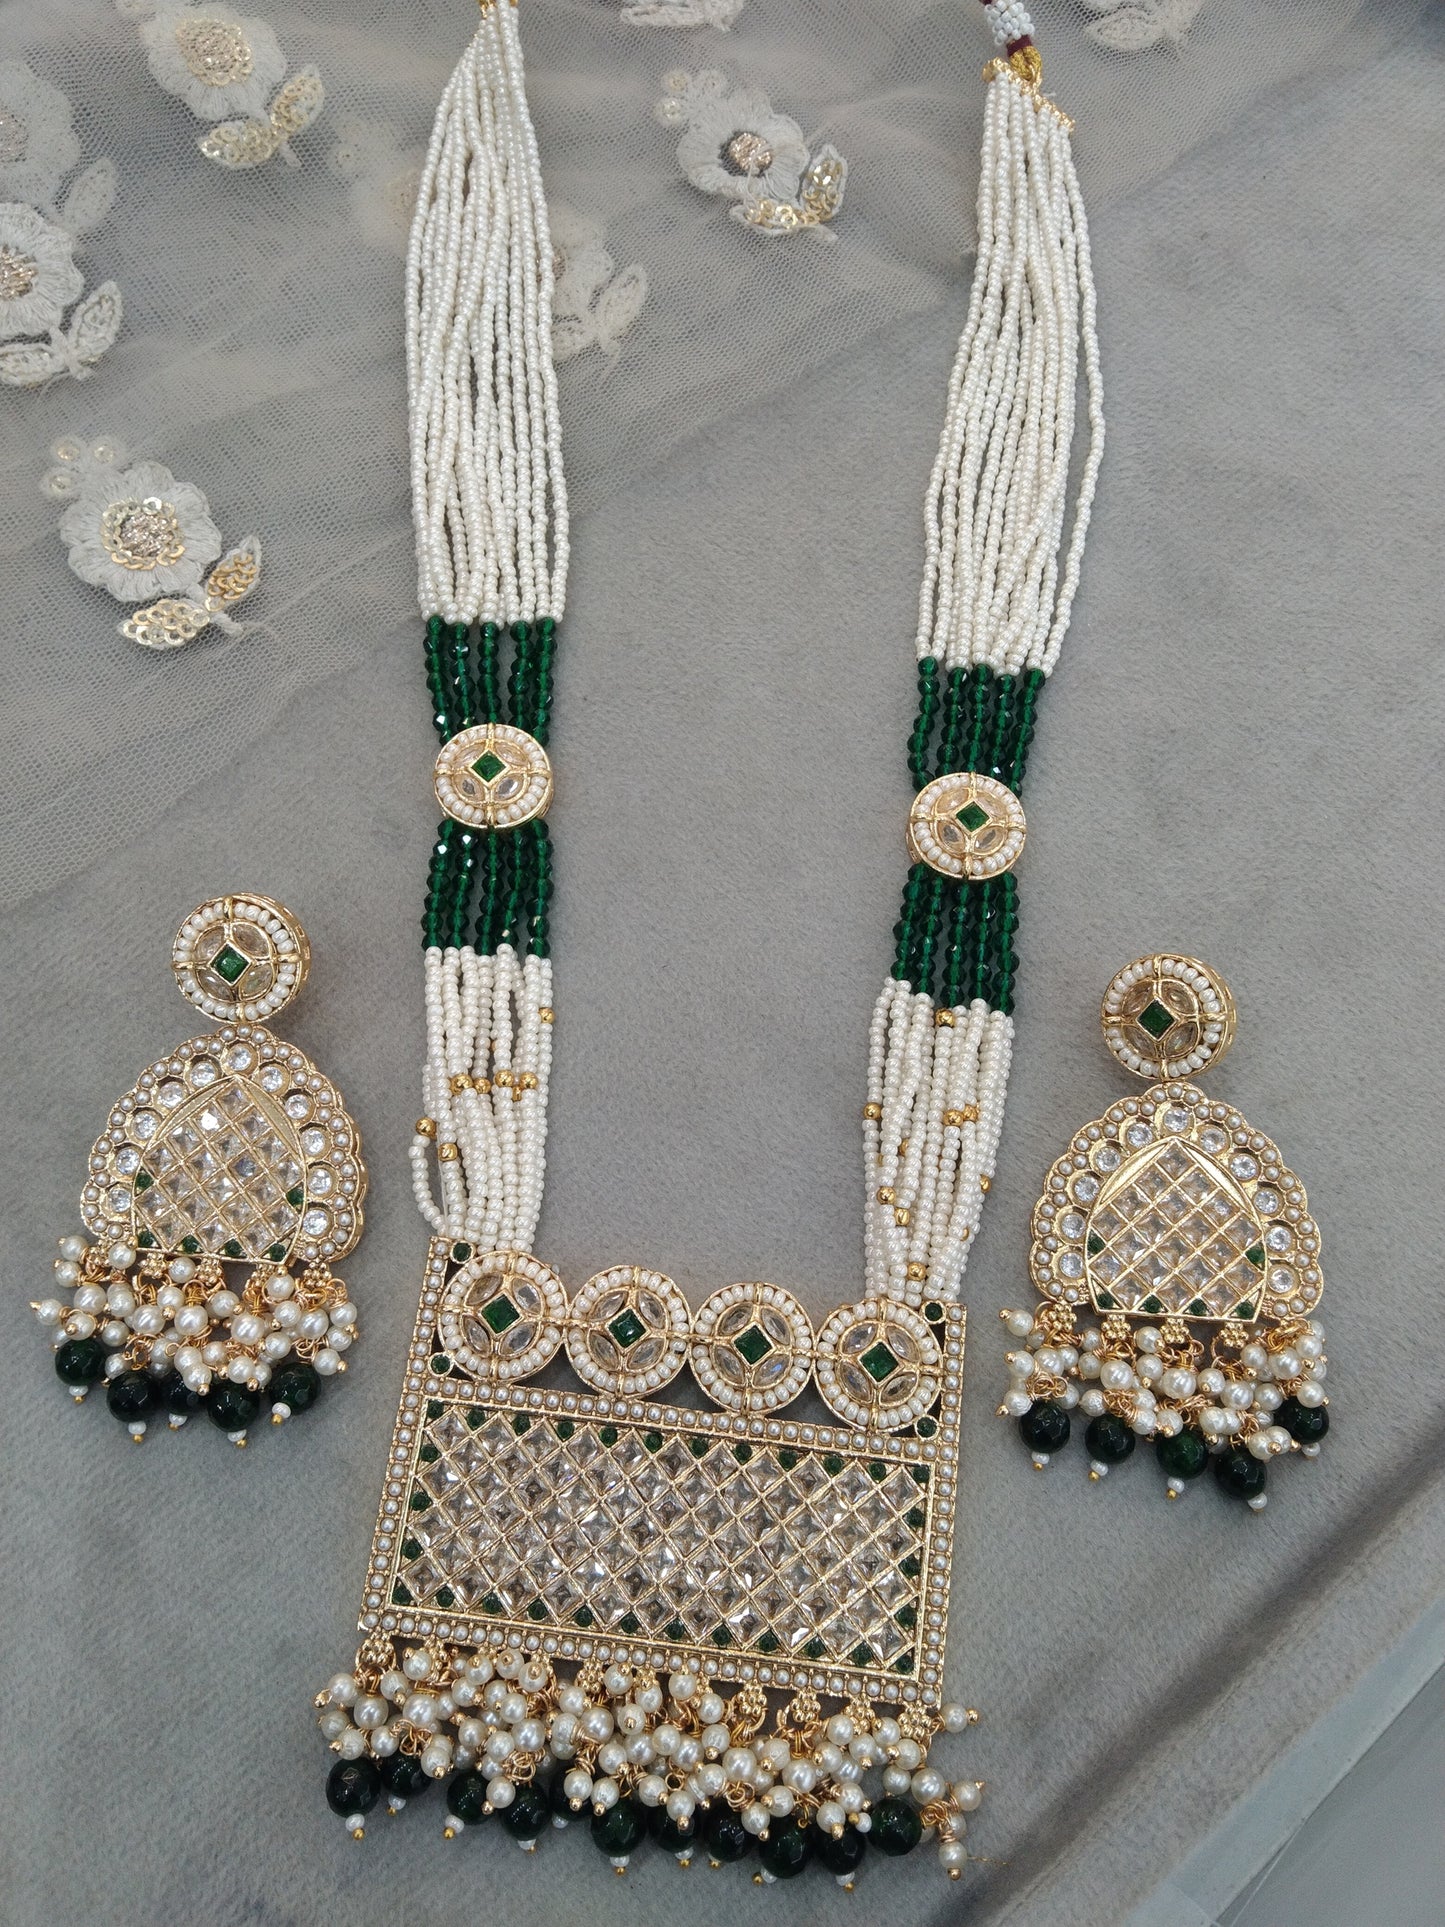 Antique gold green rani Haar Necklace Set/ Indian Jewellery/Long Necklace set